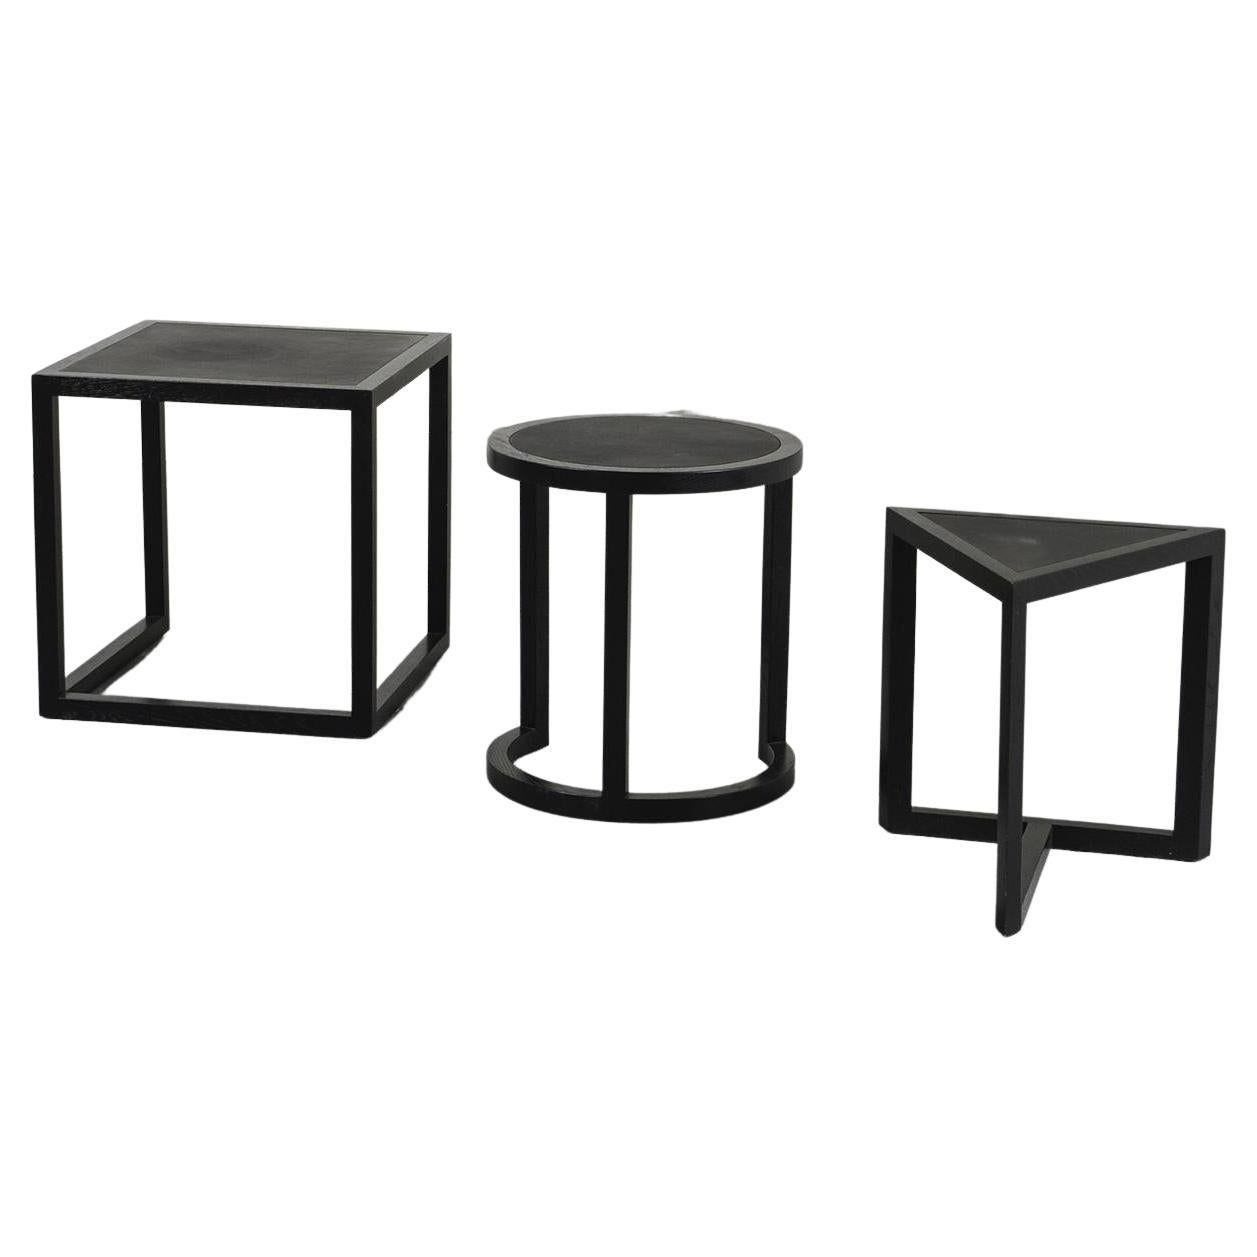 Limited Series Wood and Leather Nesting Tables by Stefan Zwicky for De Sede For Sale